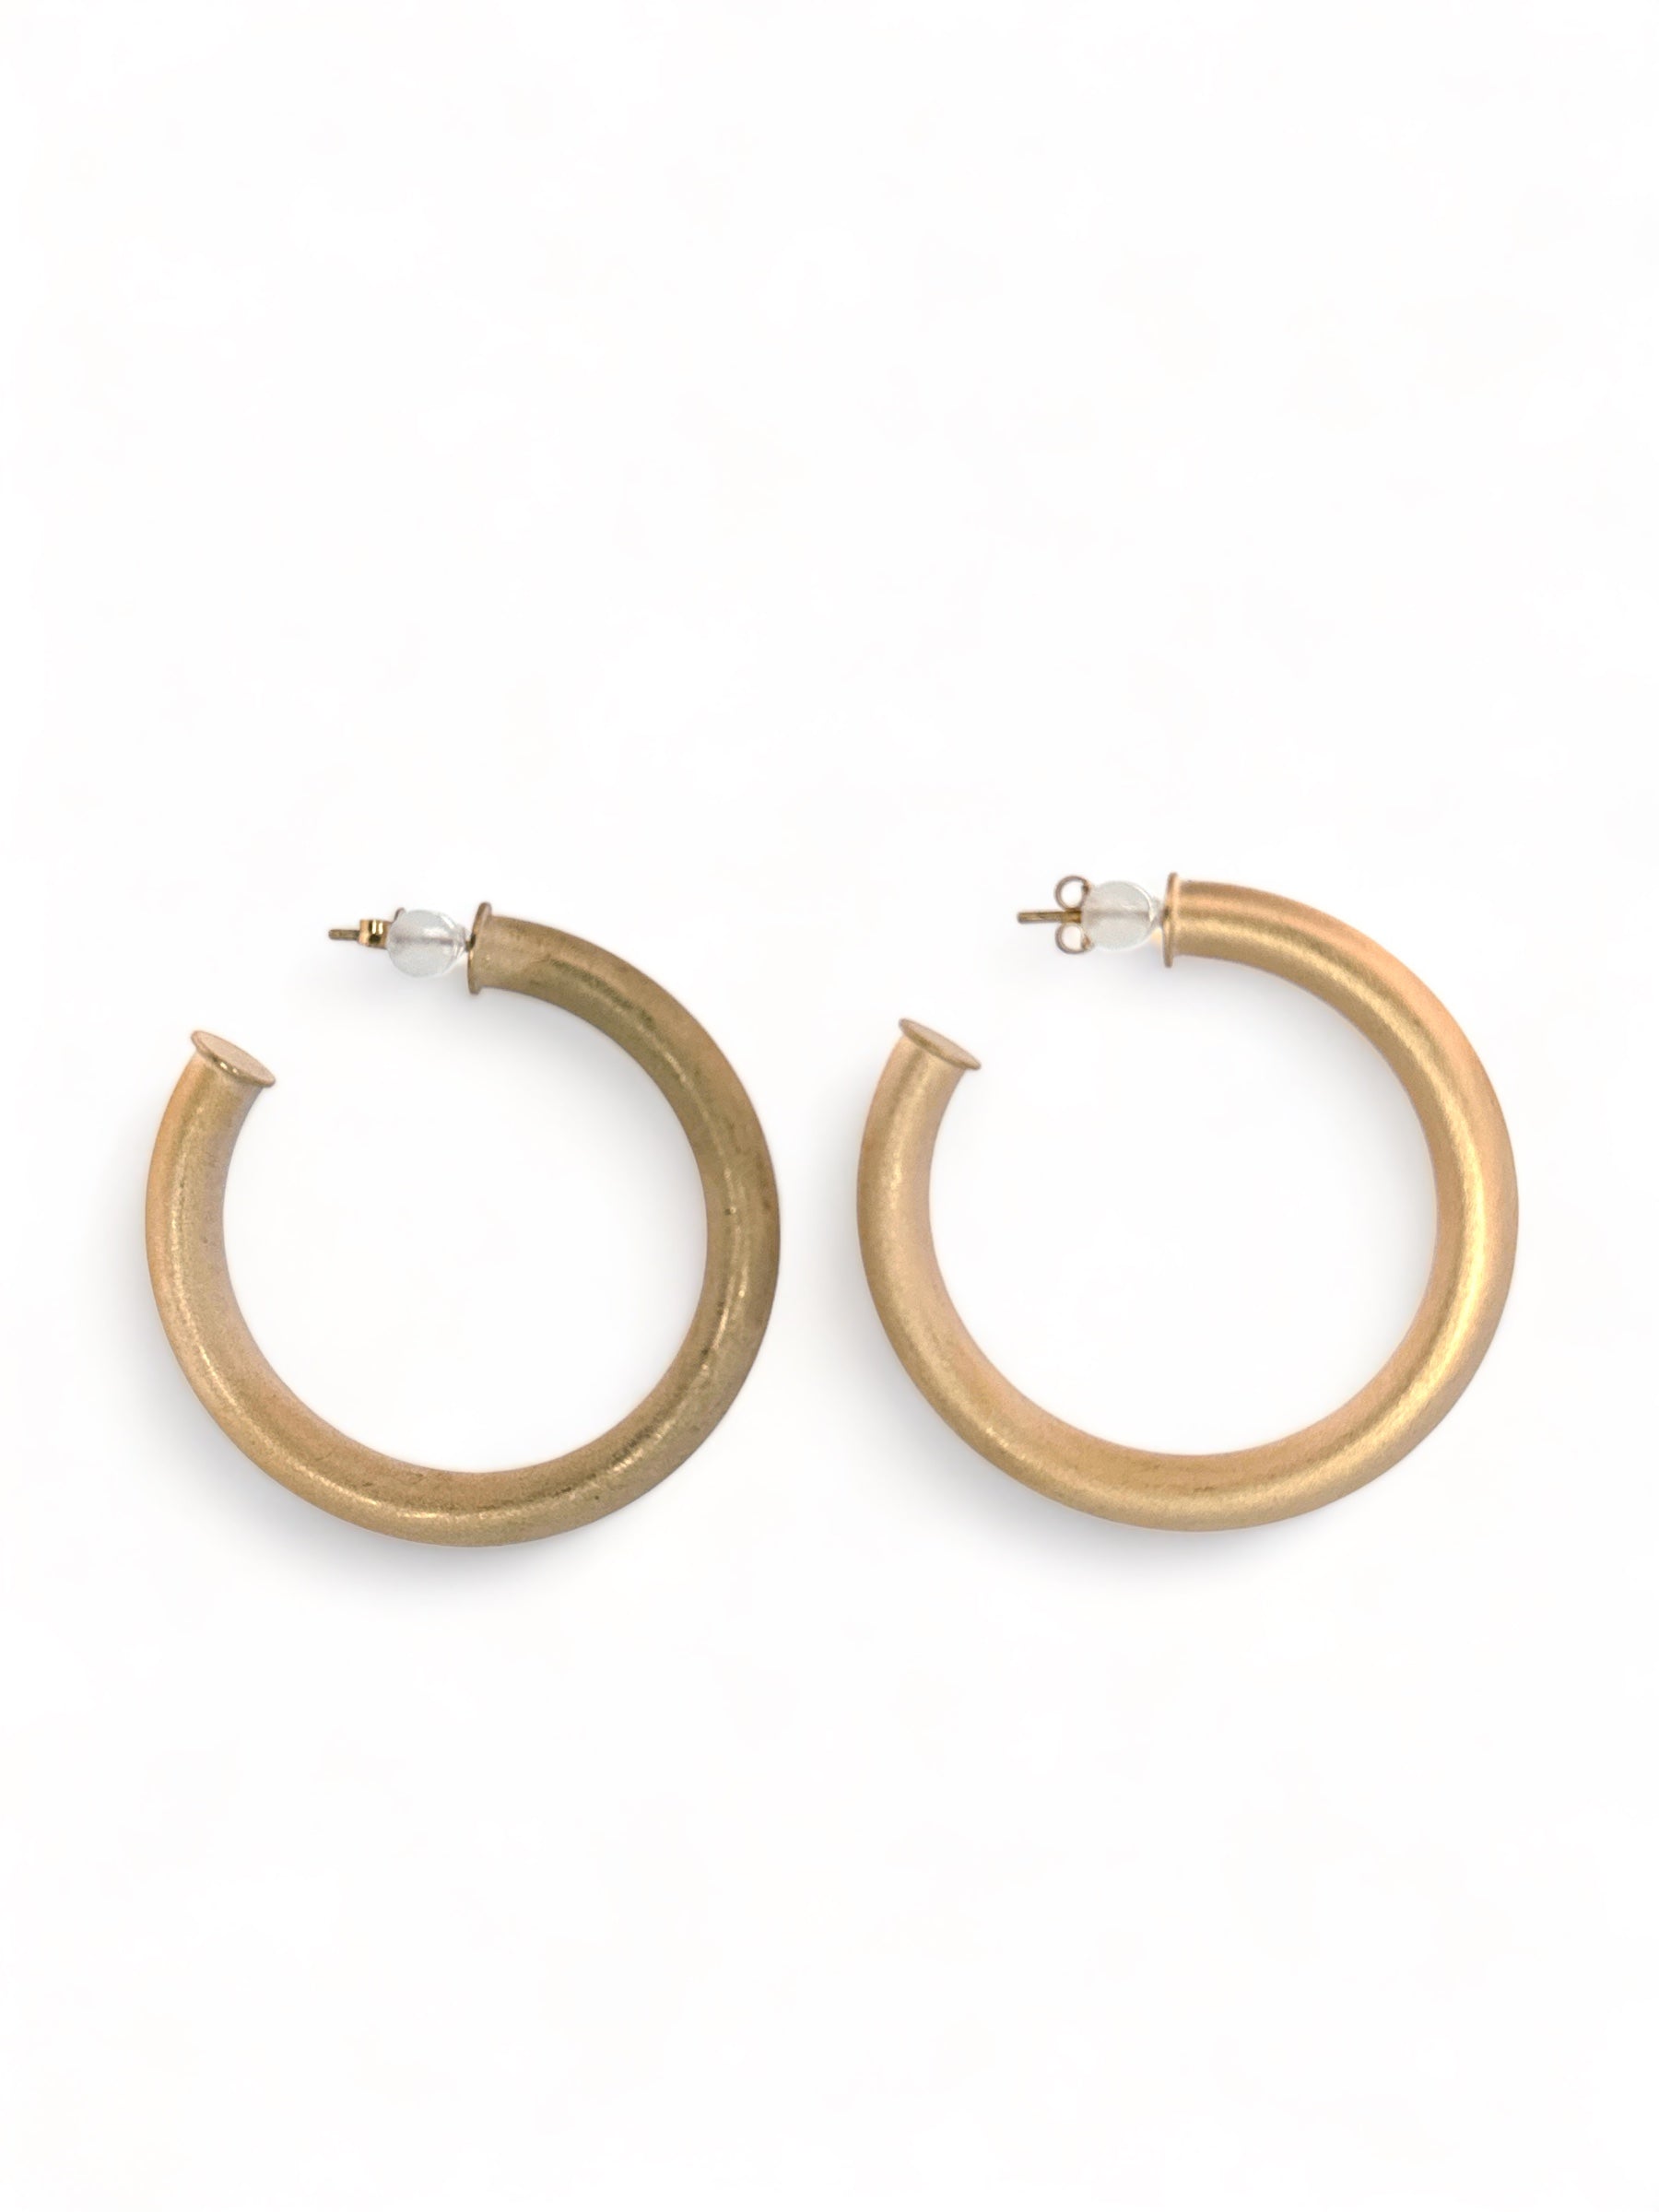 Opaque gold hoops big size gold earrings donut hoops stylish elevate your looks aesthetic rich old money aesthetic